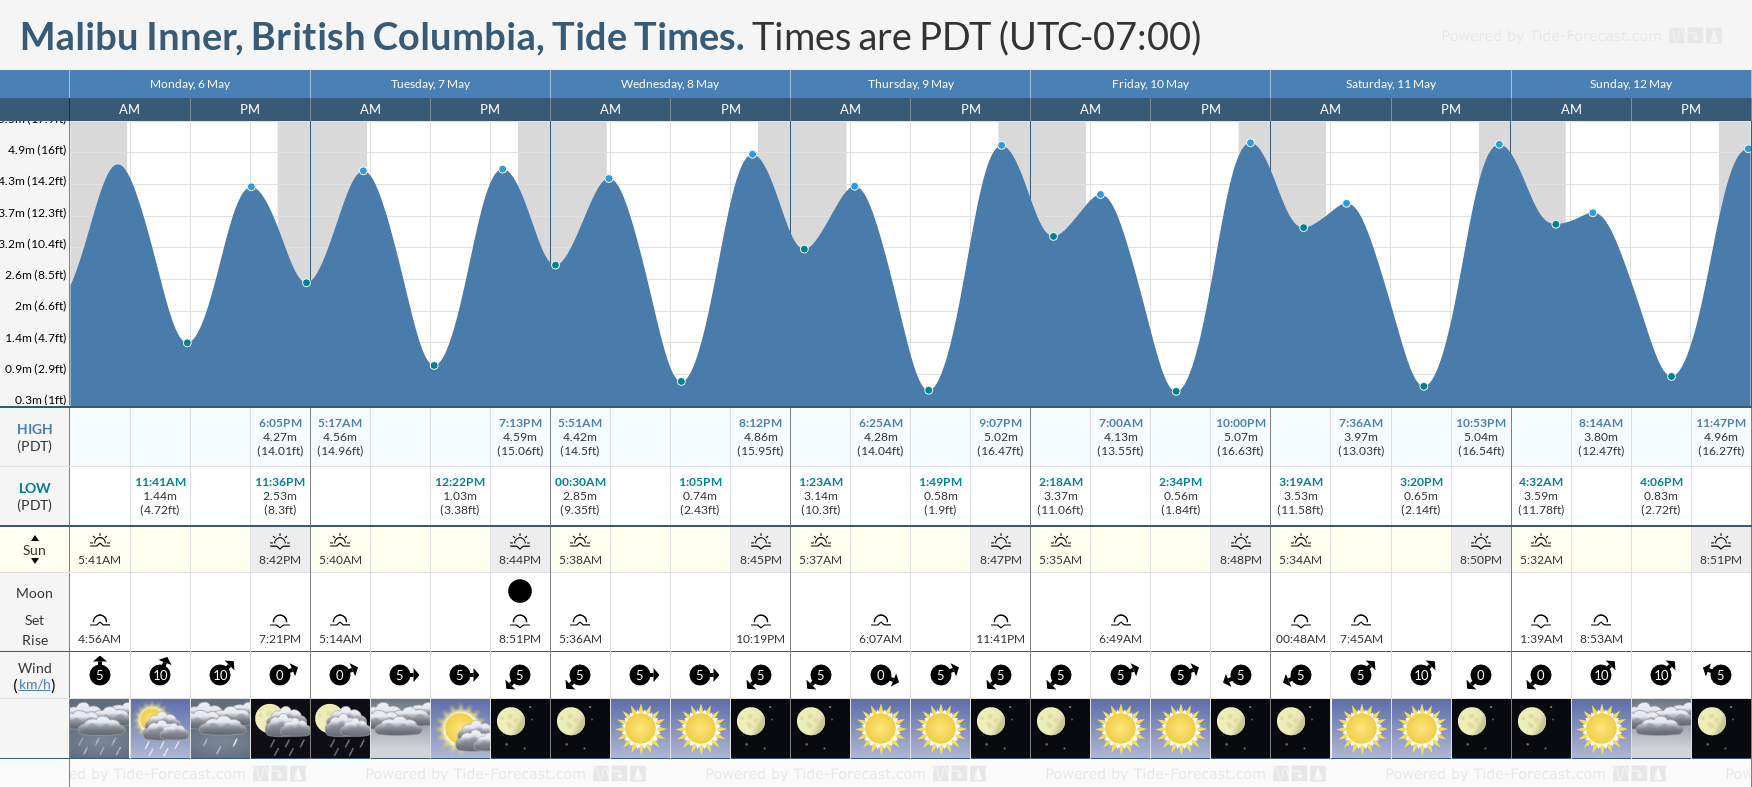 Malibu Inner, British Columbia Tide Chart including high and low tide tide times for the next 7 days